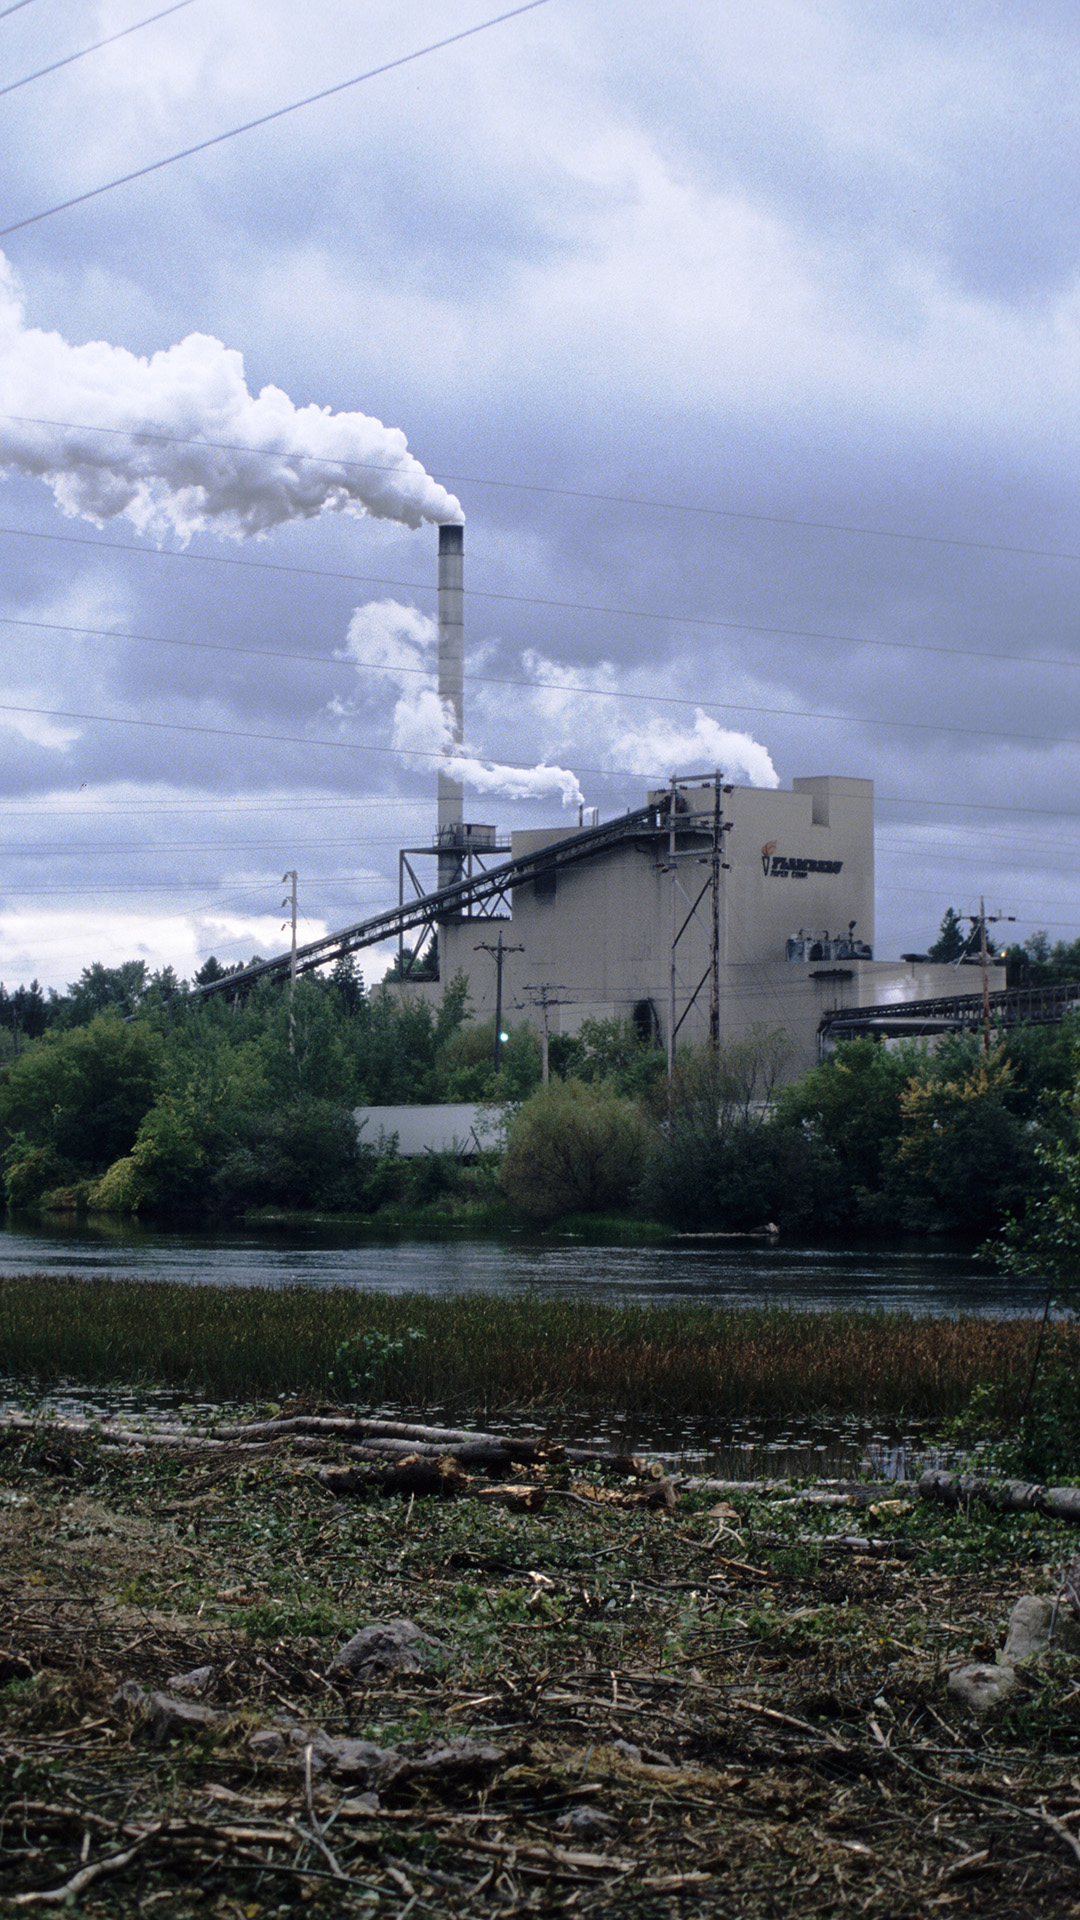 A paper mill with a tall stack and multi-story conveyer system stands amid trees on the far side of a river, with power lines crossing overhead in the foreground.